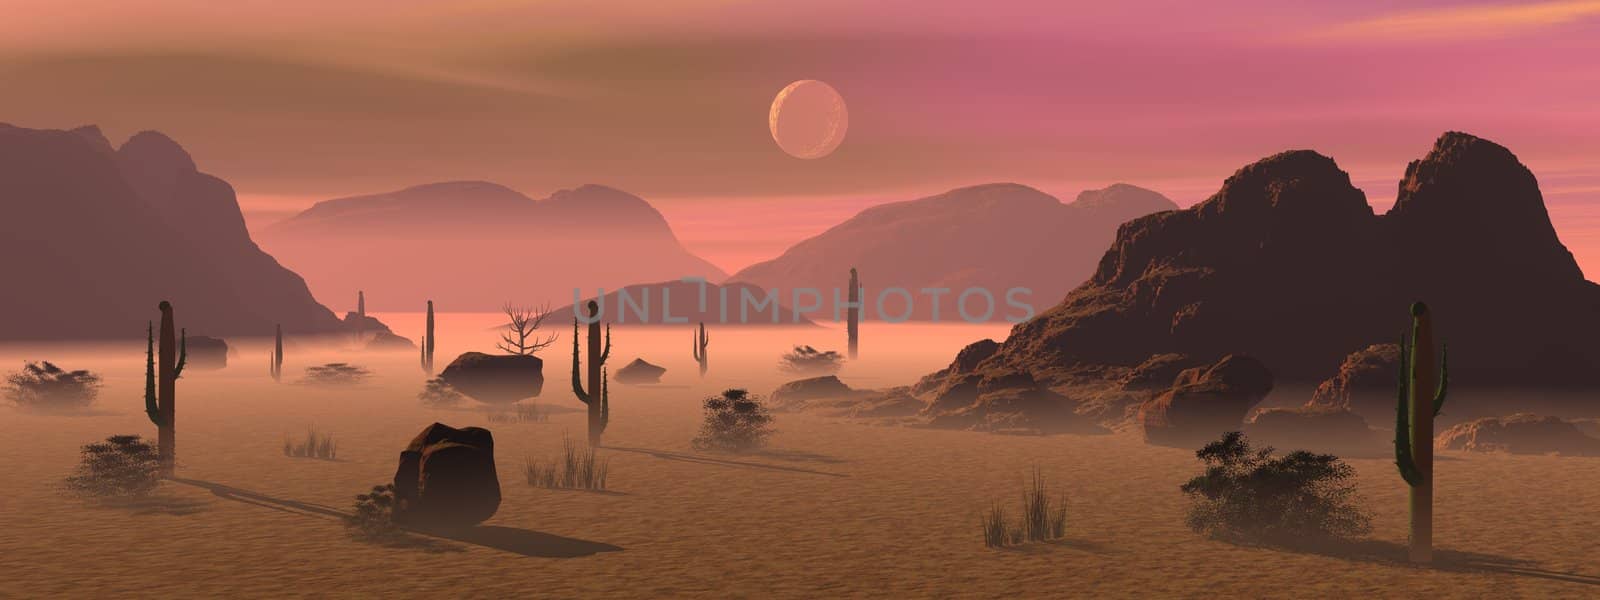 Desert landscape by morning light with moon, fog, cactus, plants and ,ountains